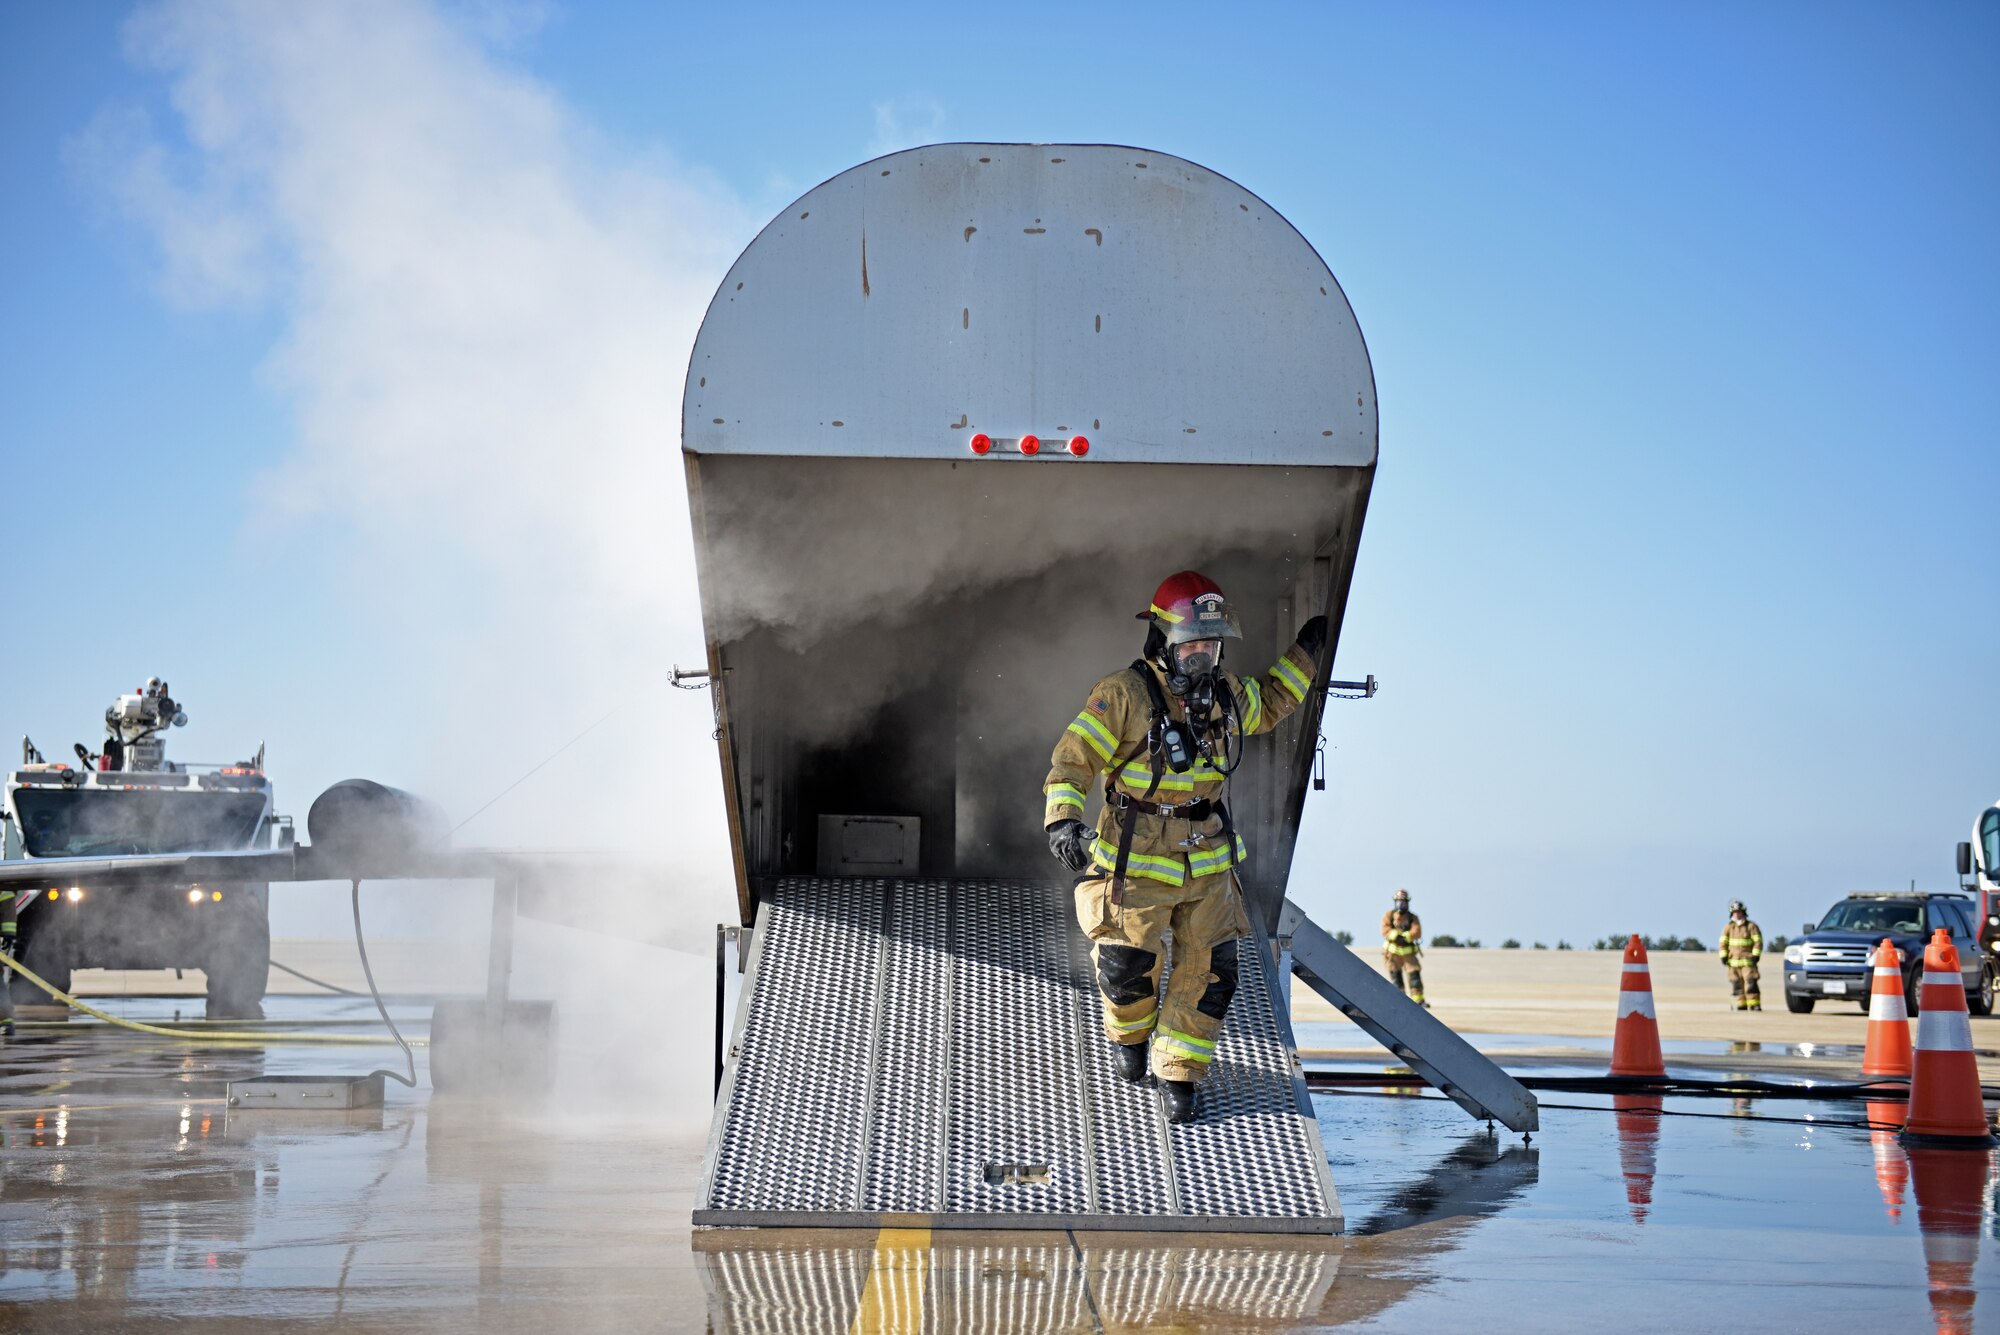 A U.S. Air Force firefighter assigned to the 8th Civil Engineer Squadron exits an aircraft fire trainer during a live fire simulation at Kunsan Air Base, Republic of Korea, Nov. 20, 2019. Live fire training ensures active duty firefighters are prepared for emergencies on the installation while also maintaining readiness. (U.S. Air Force photo by Staff Sgt. Mackenzie Mendez)